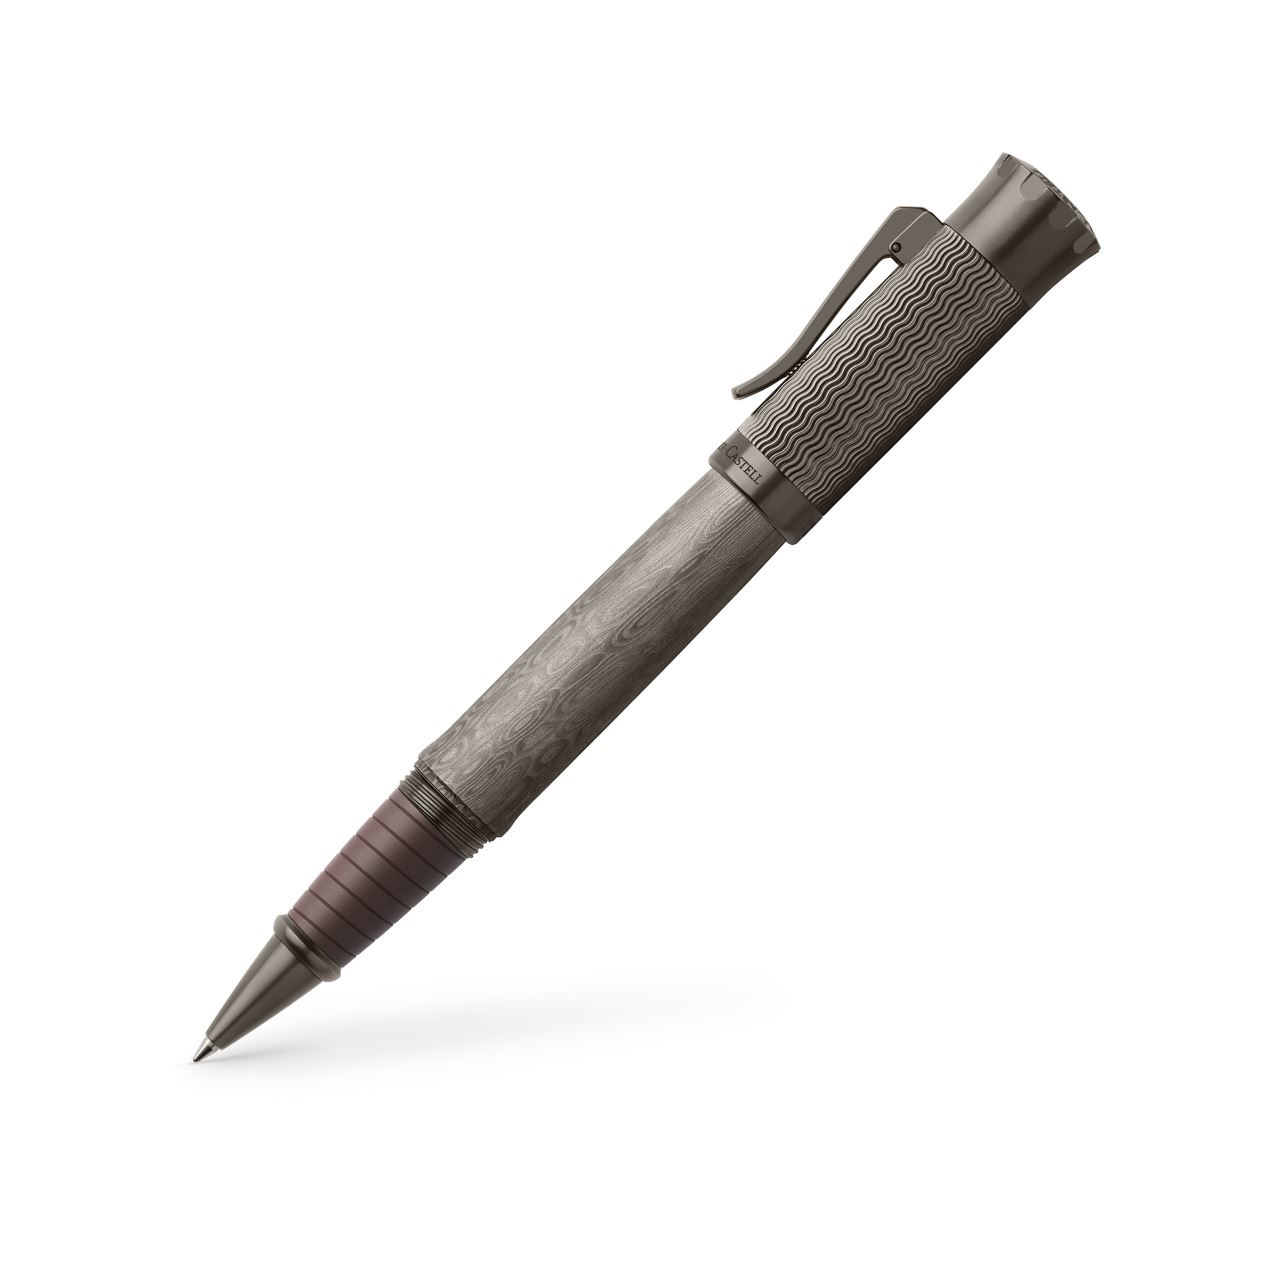 Graf-von-Faber-Castell - Roller Pen of the year 2021 Limited Edition